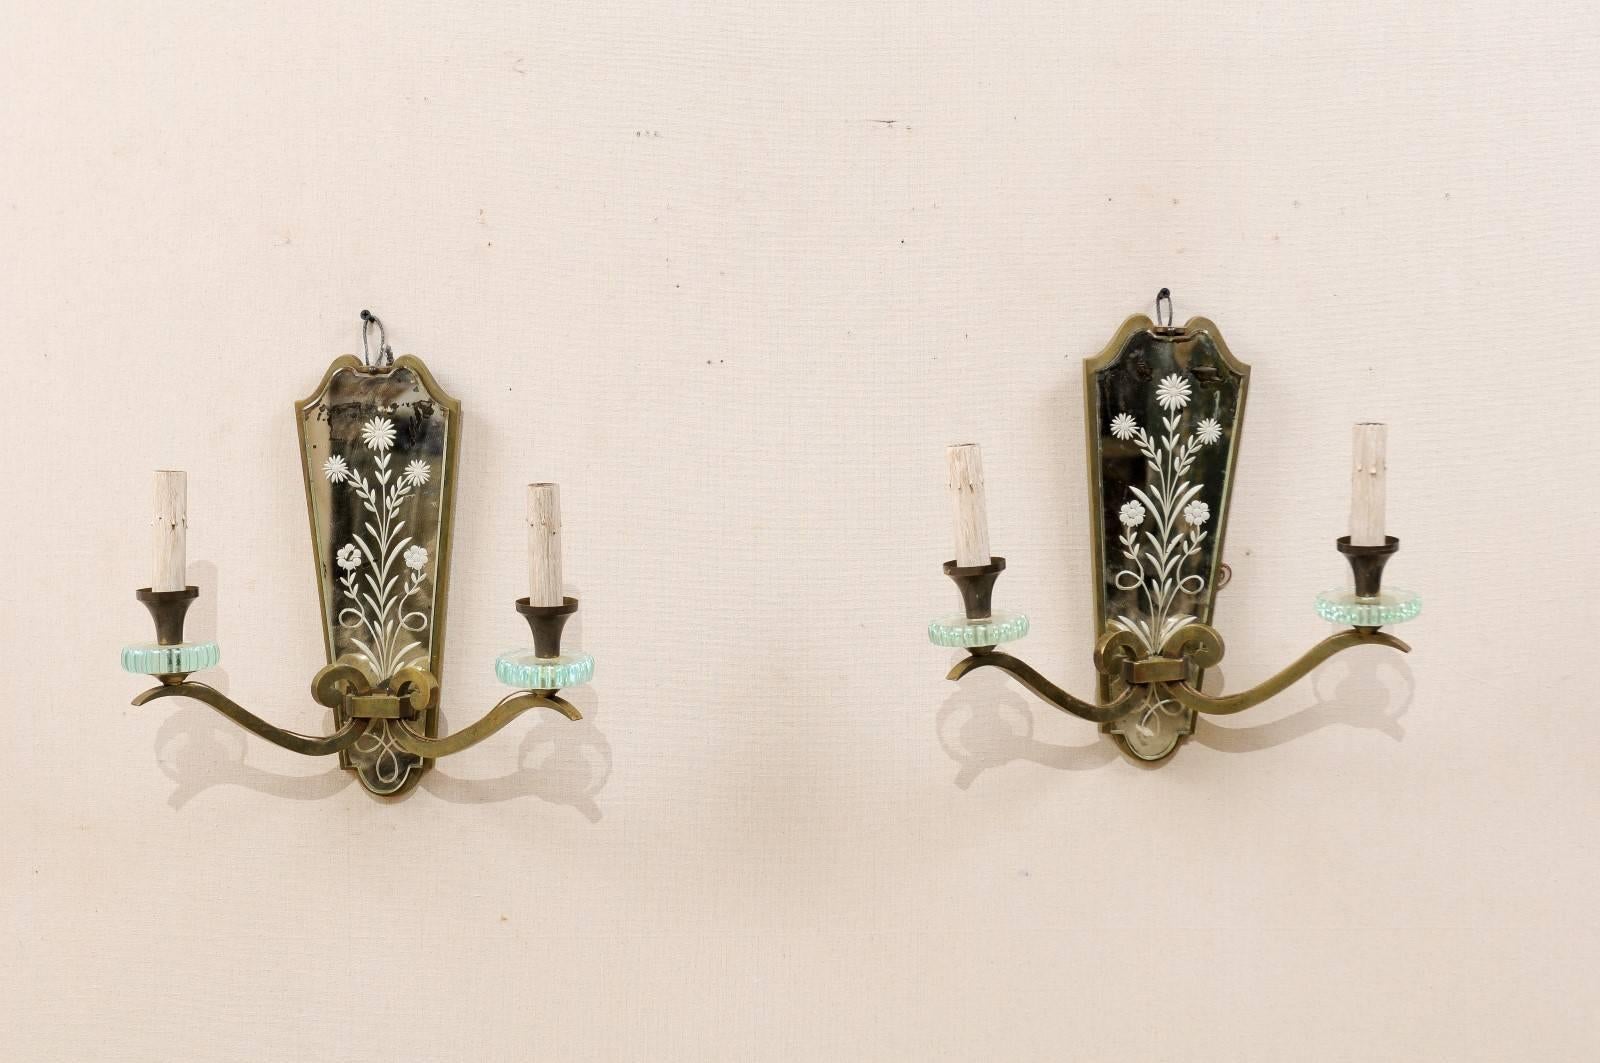 A pair of Mid-Century French two-light Églomisé mirrored sconces. This French pair of sconces, from the mid-20th century, feature a delicately Églomisé or etched mirrored back-plate in a floral motif, with a curved arch top, and straight sides which